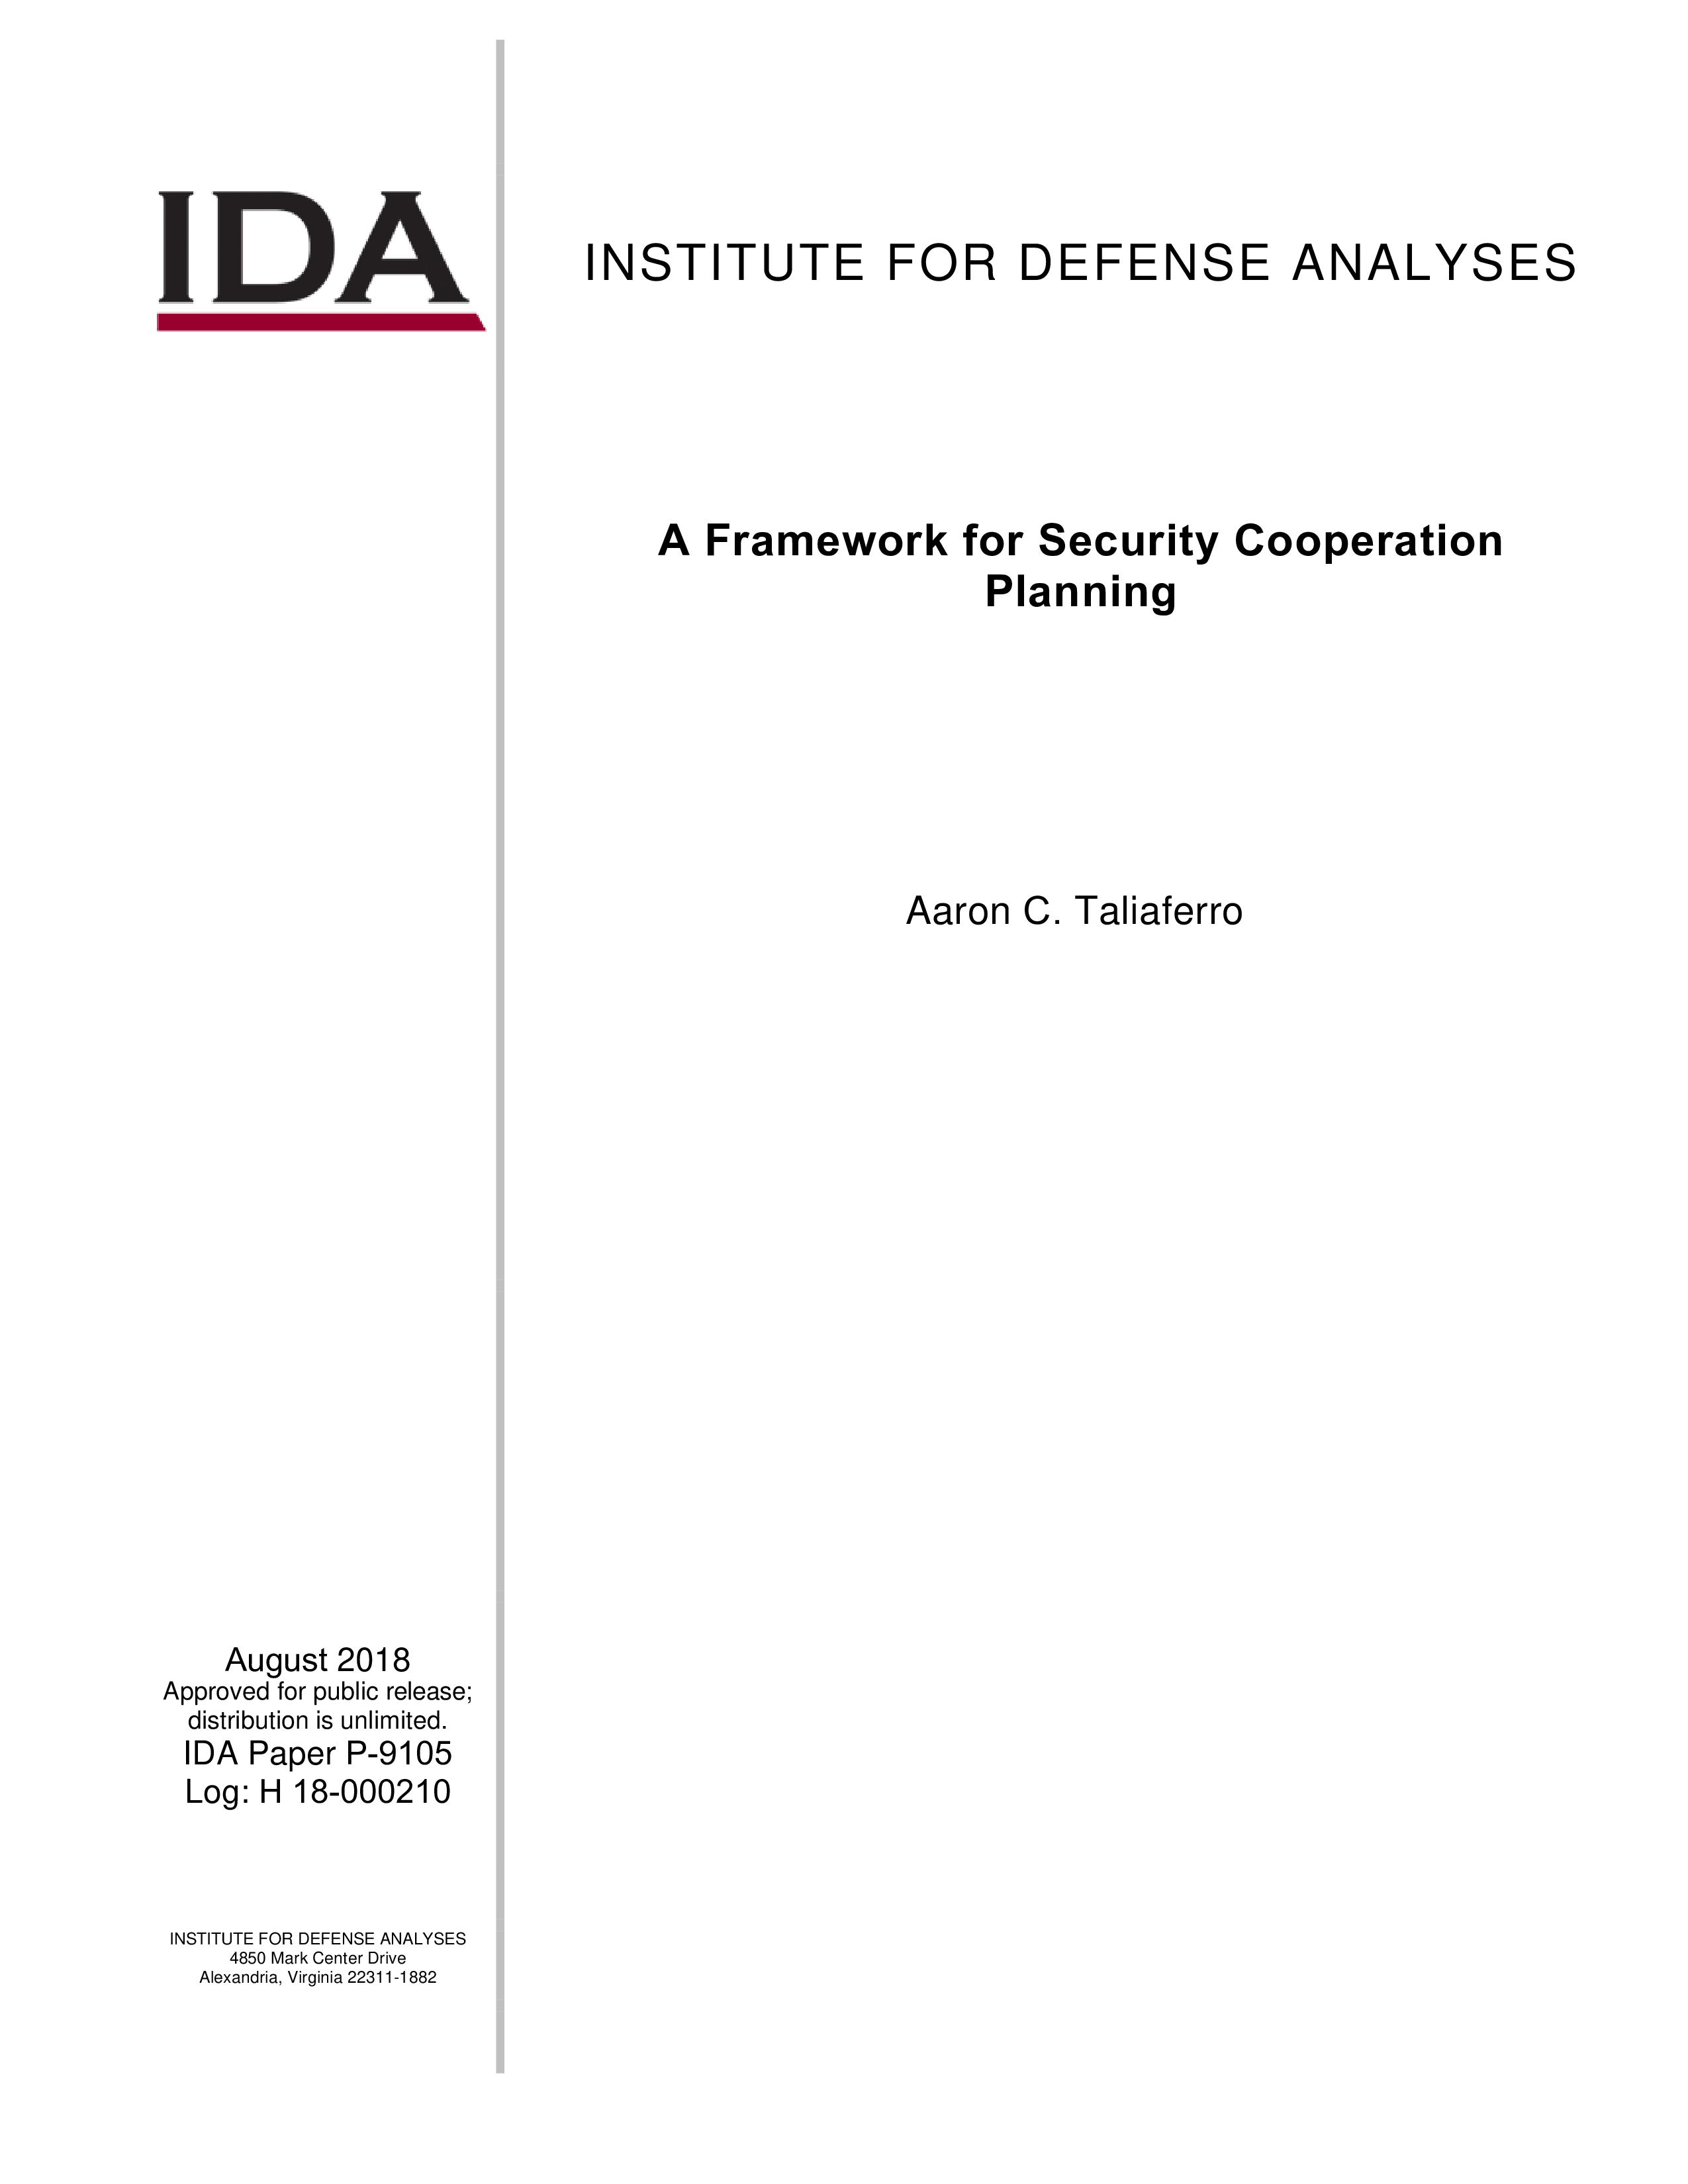 A Framework for Security Cooperation Planning